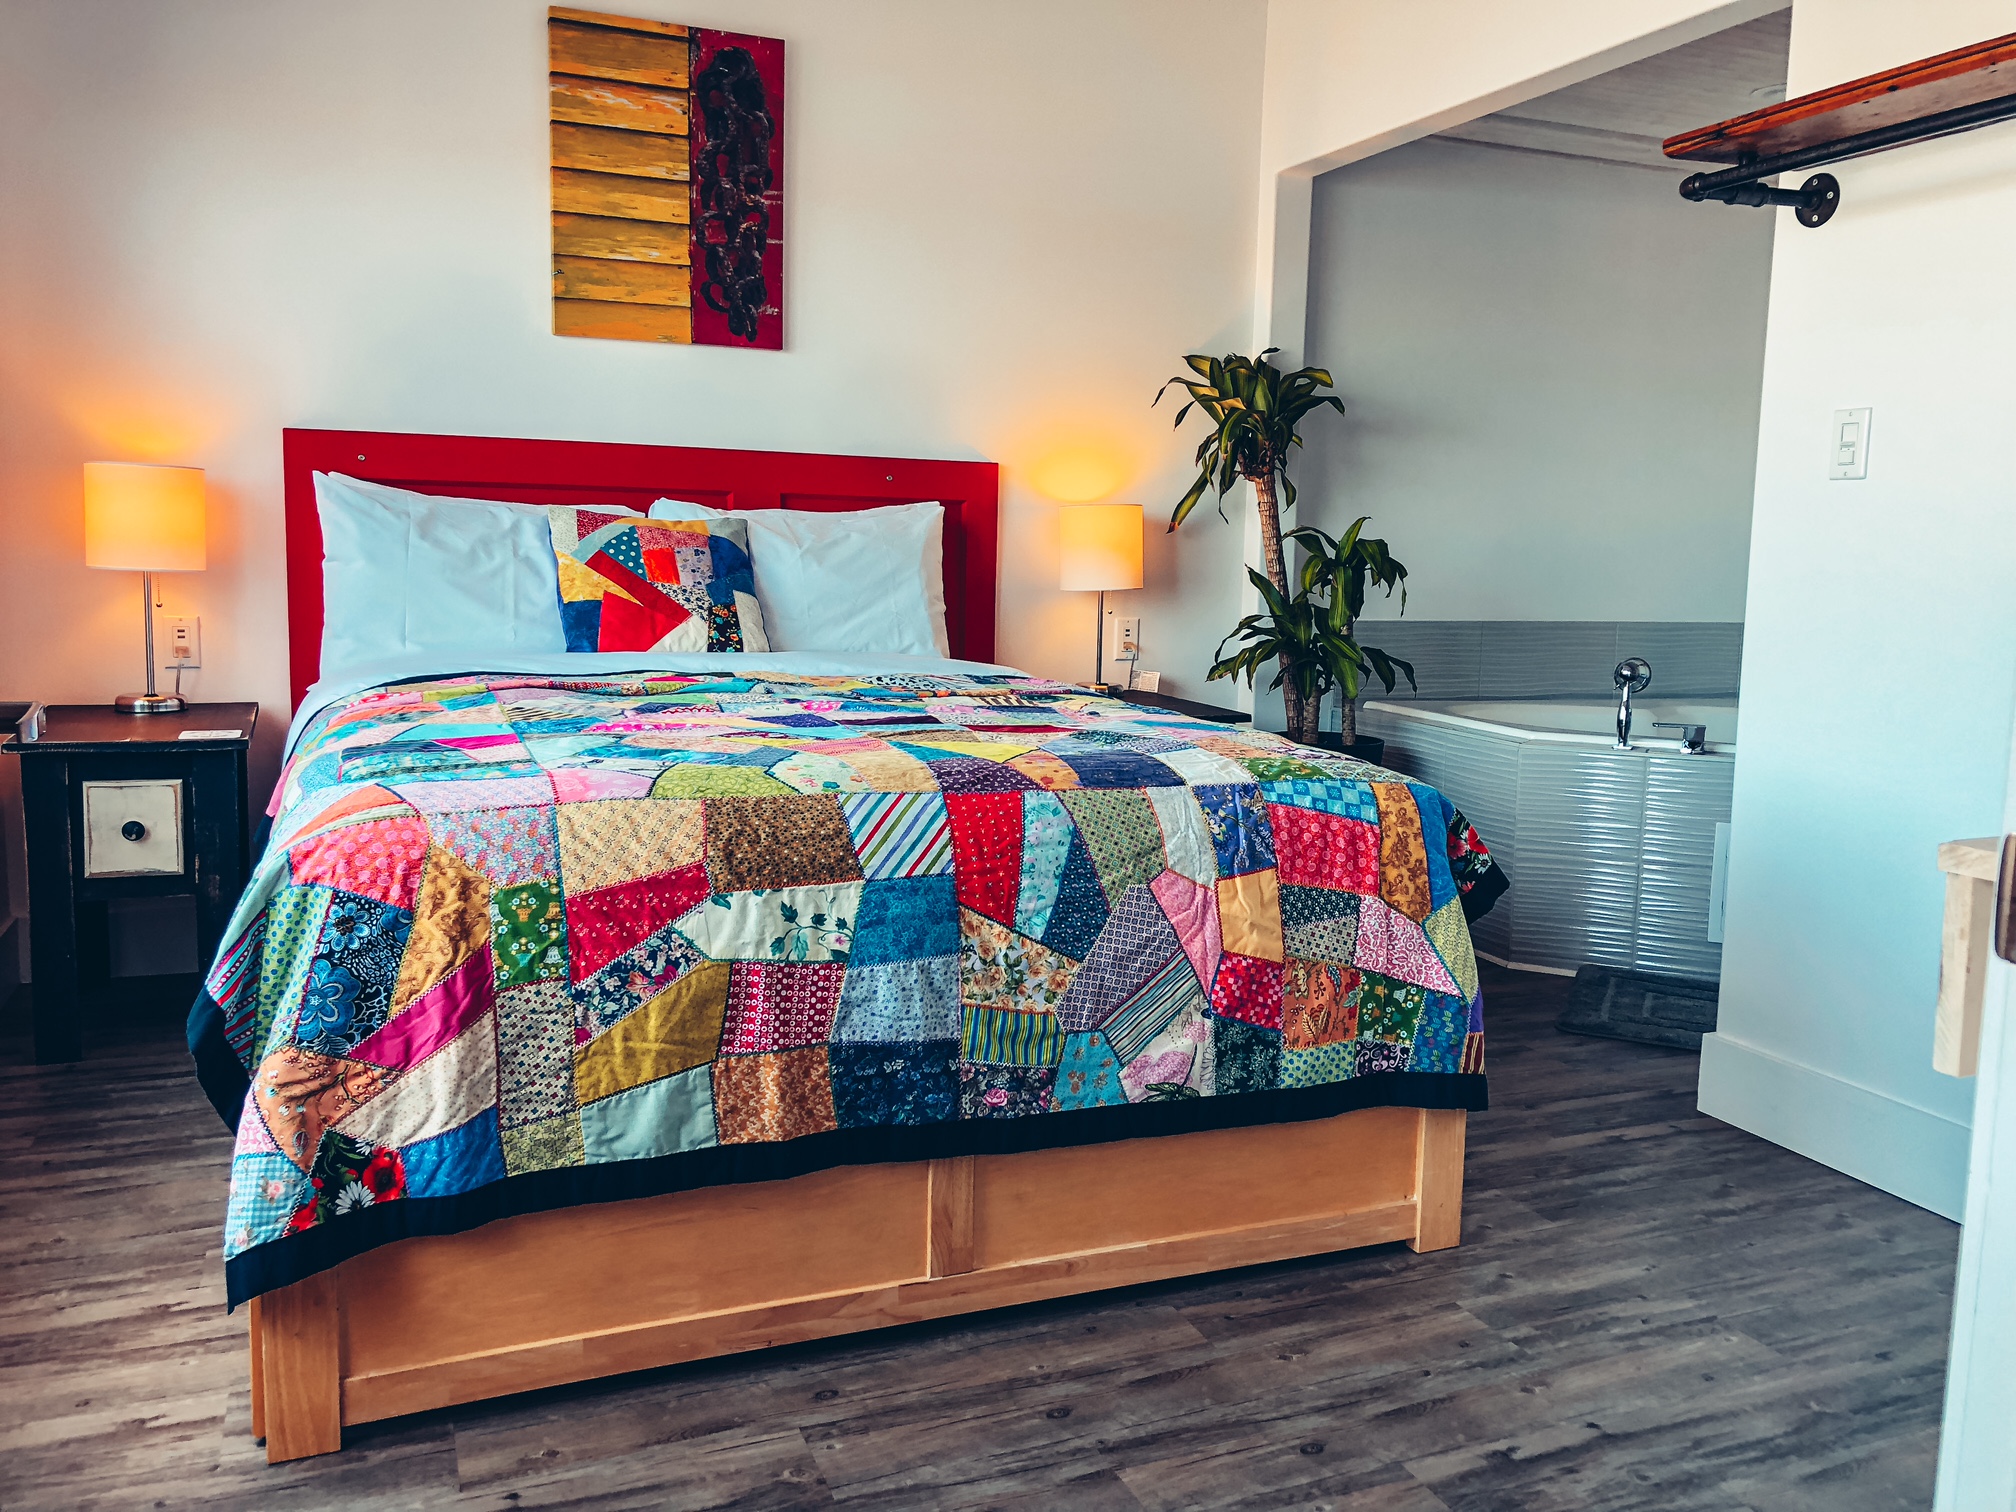 A photo of the main bedroom of the suite. There's a queen sized bed with a red headboard and a colourful quilt on it, and in the corner you can see a jacuzzi.